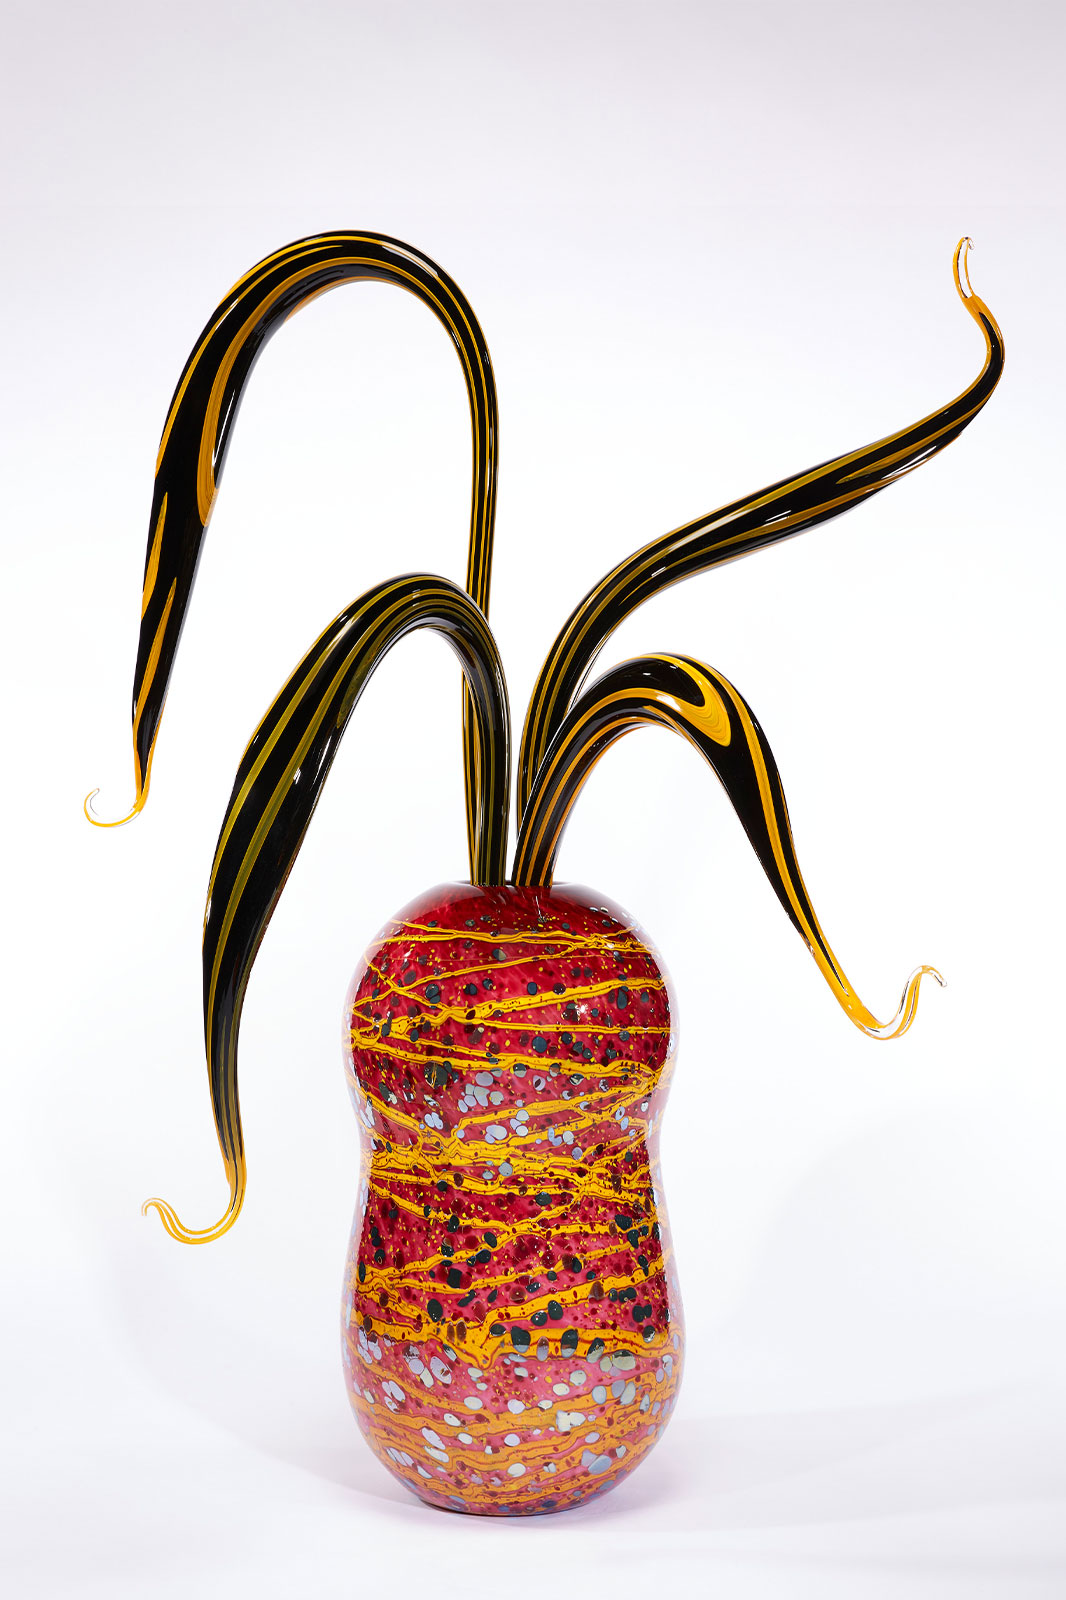 Dale Chihuly, Magenta Ikebana with Black and Yellow Striped Herons, 2018